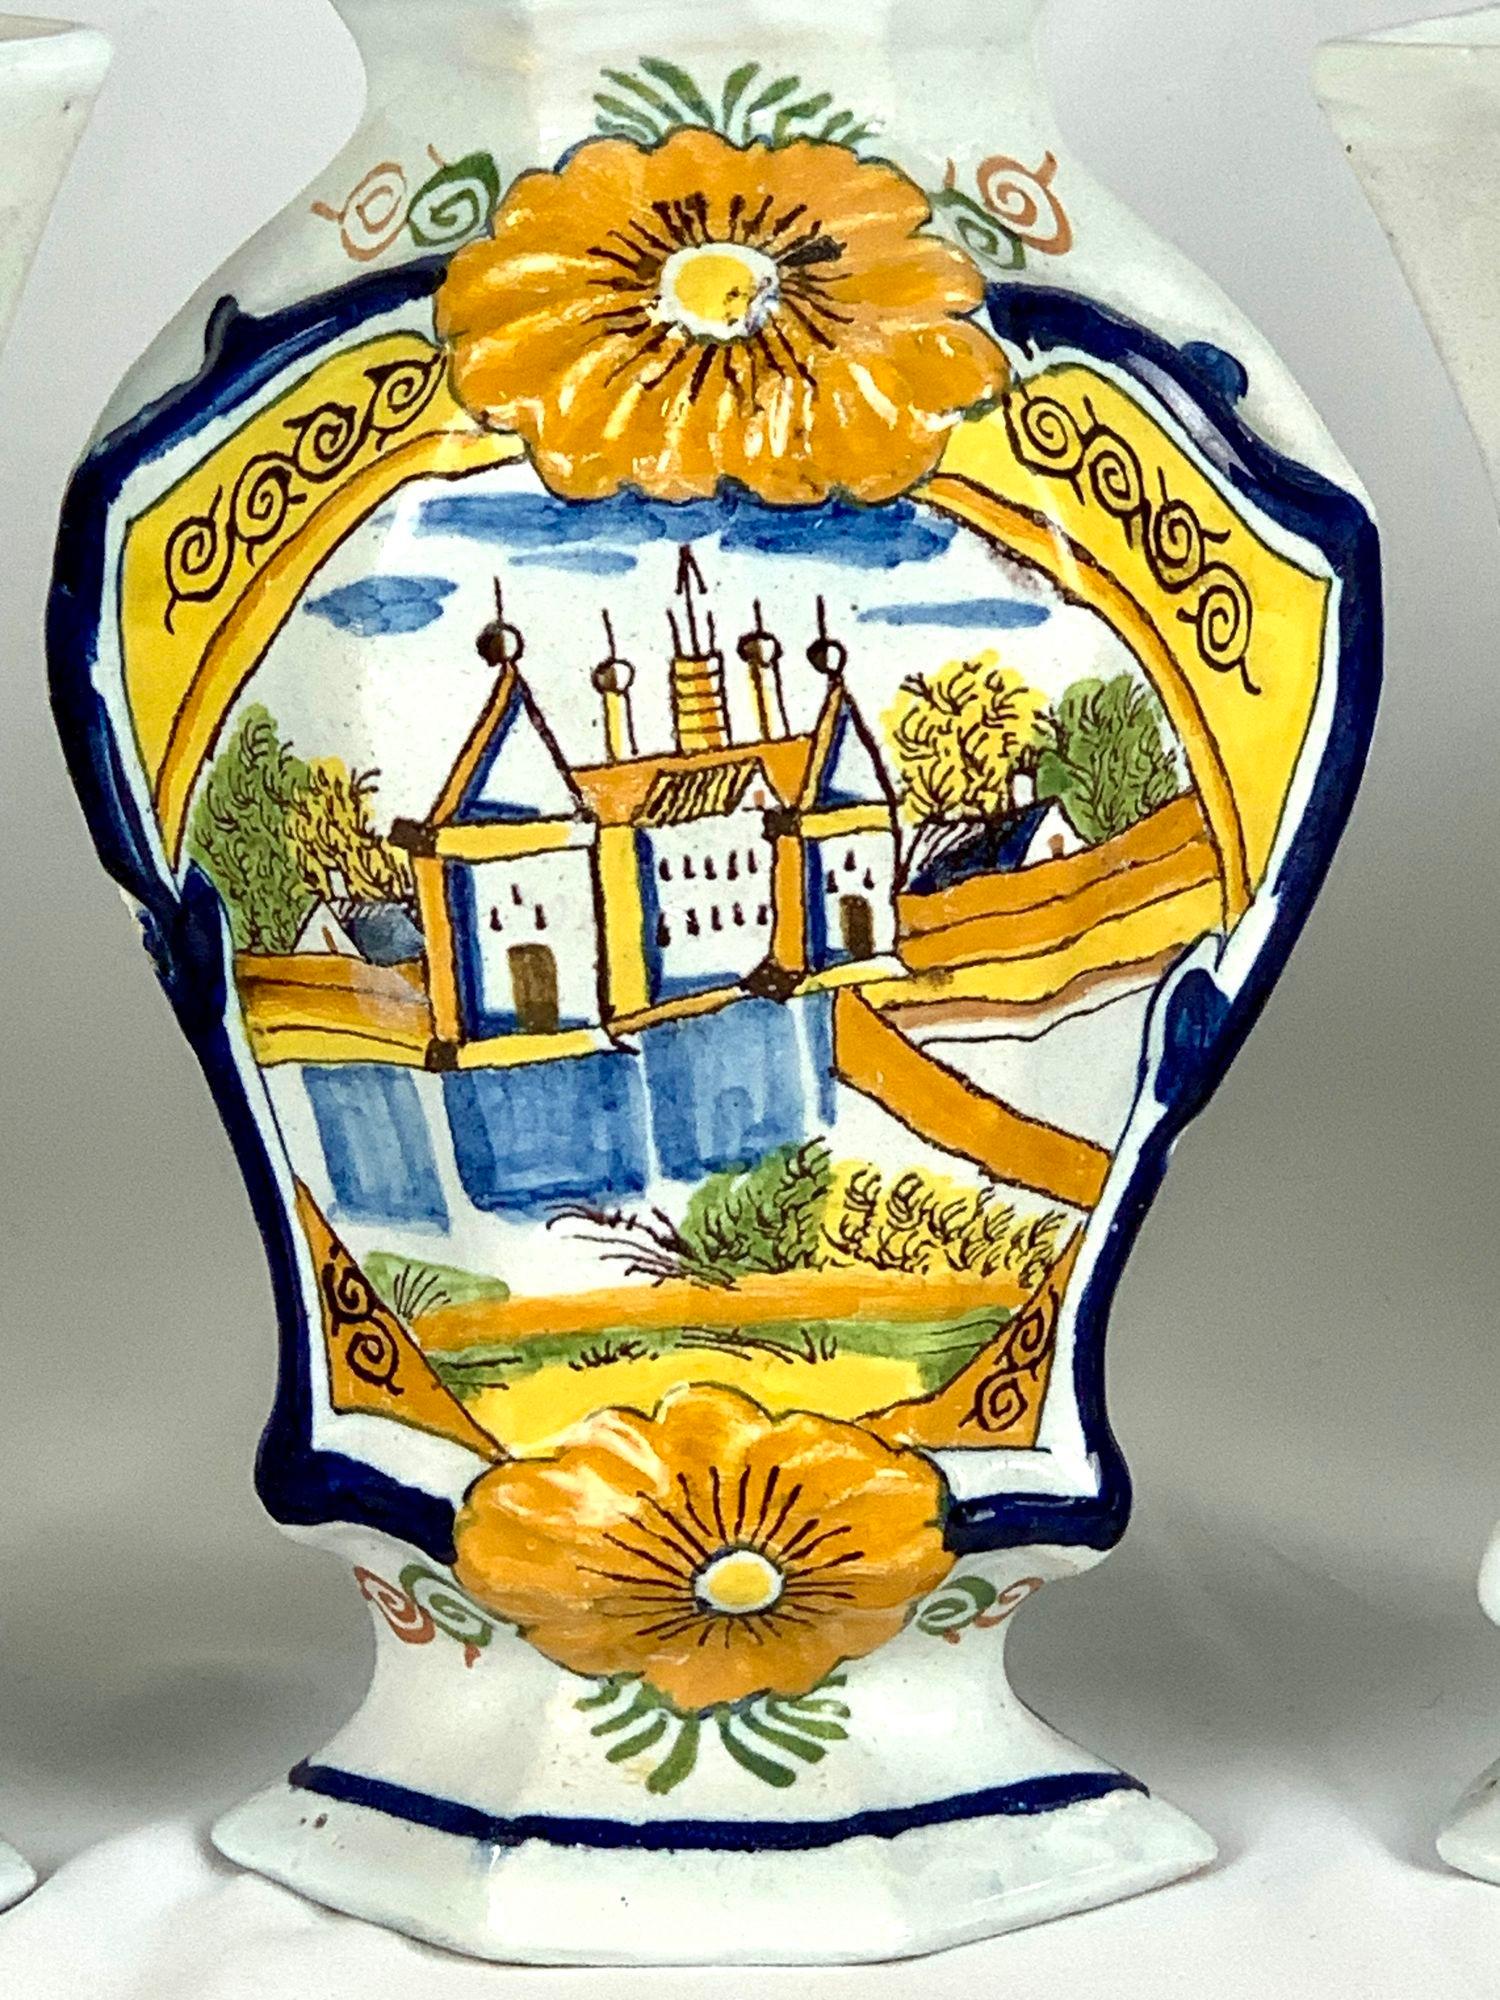 This Dutch Delft mantle garniture comprises five pieces: three lidded vases and a pair of flute-shaped vases.
It was crafted in the Netherlands around 1780.
The design features a hand-painted, naive scene of a castle behind a moat filled with blue